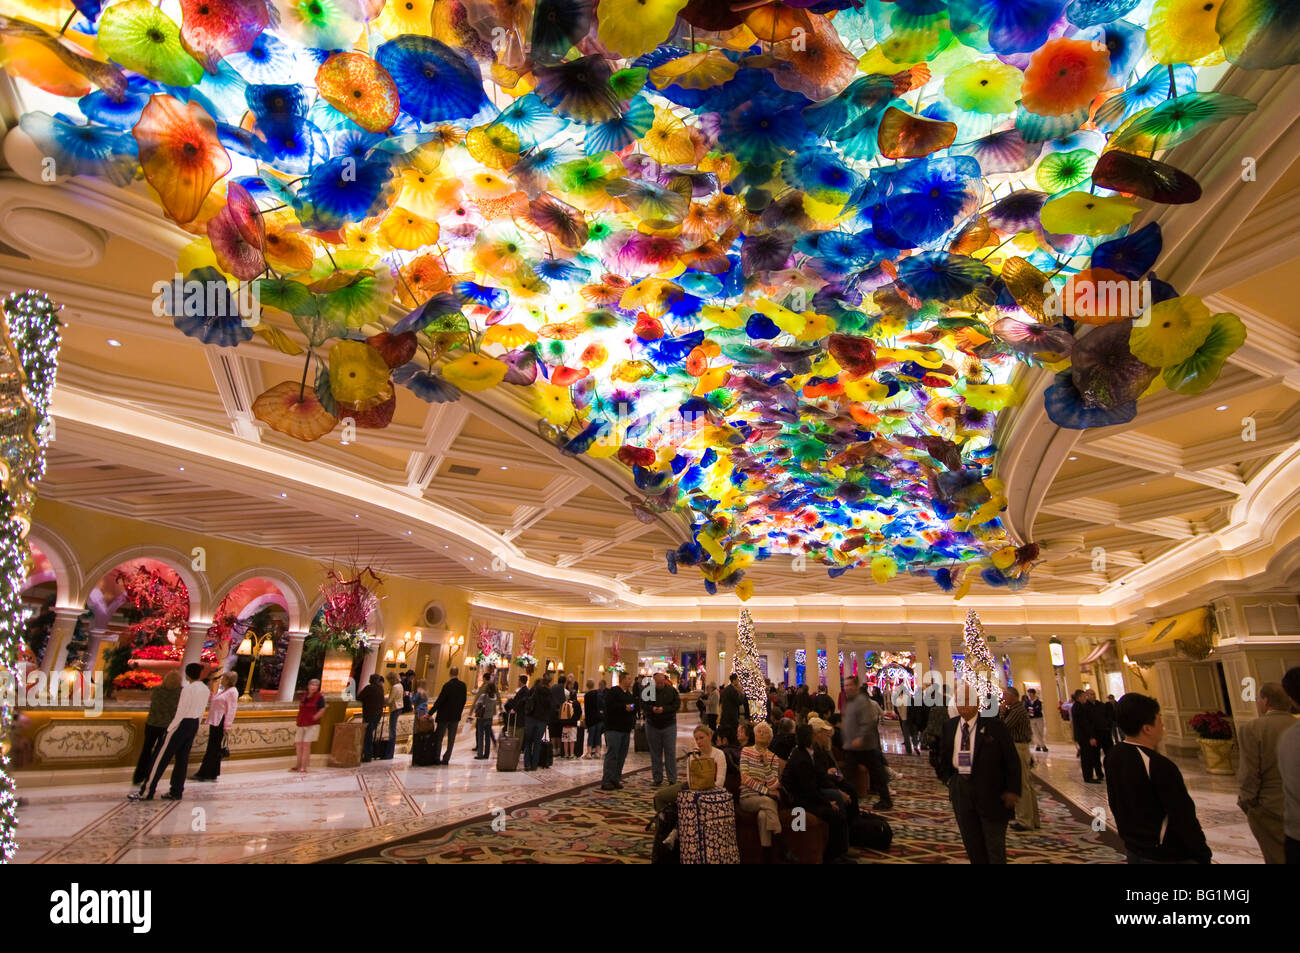 Glass Flower Ceiling by Dale Chihuly, Bellagio Hotel lobby, The Strip, Las Vegas, Nevada, USA Stock Photo